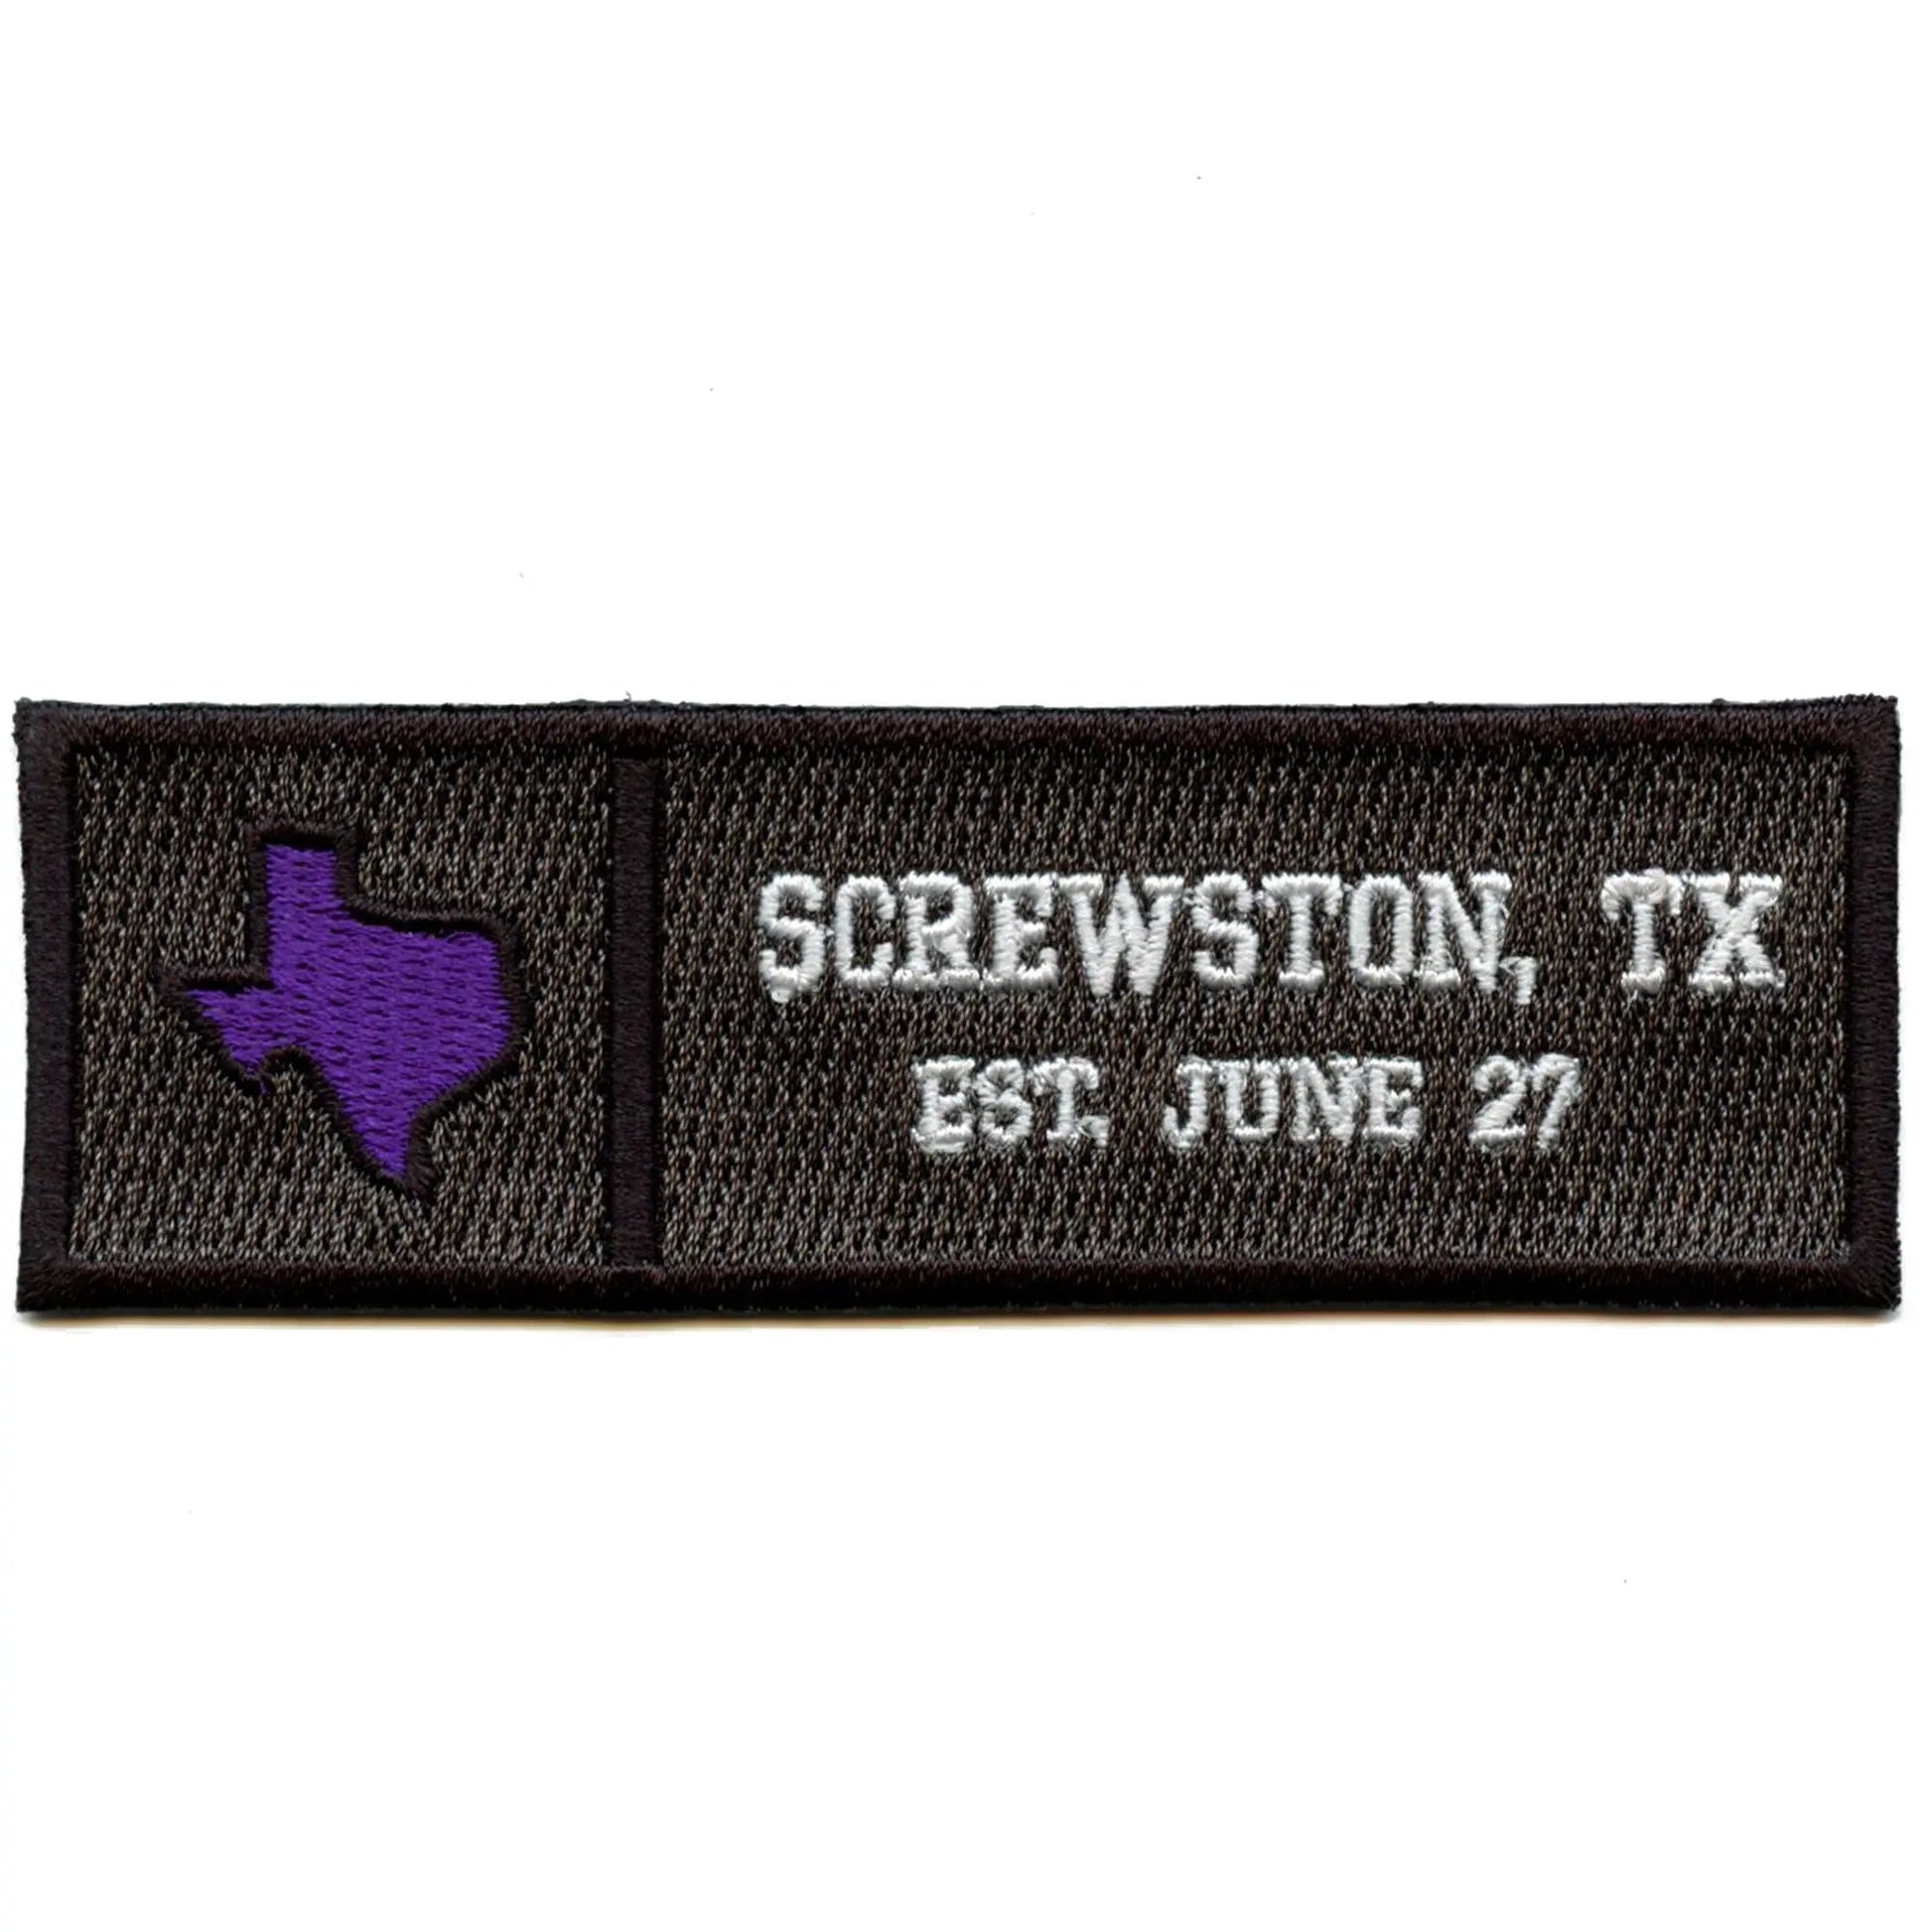 Screwston Jersey Tag Patch Houston Established Texas Embroidered Iron On